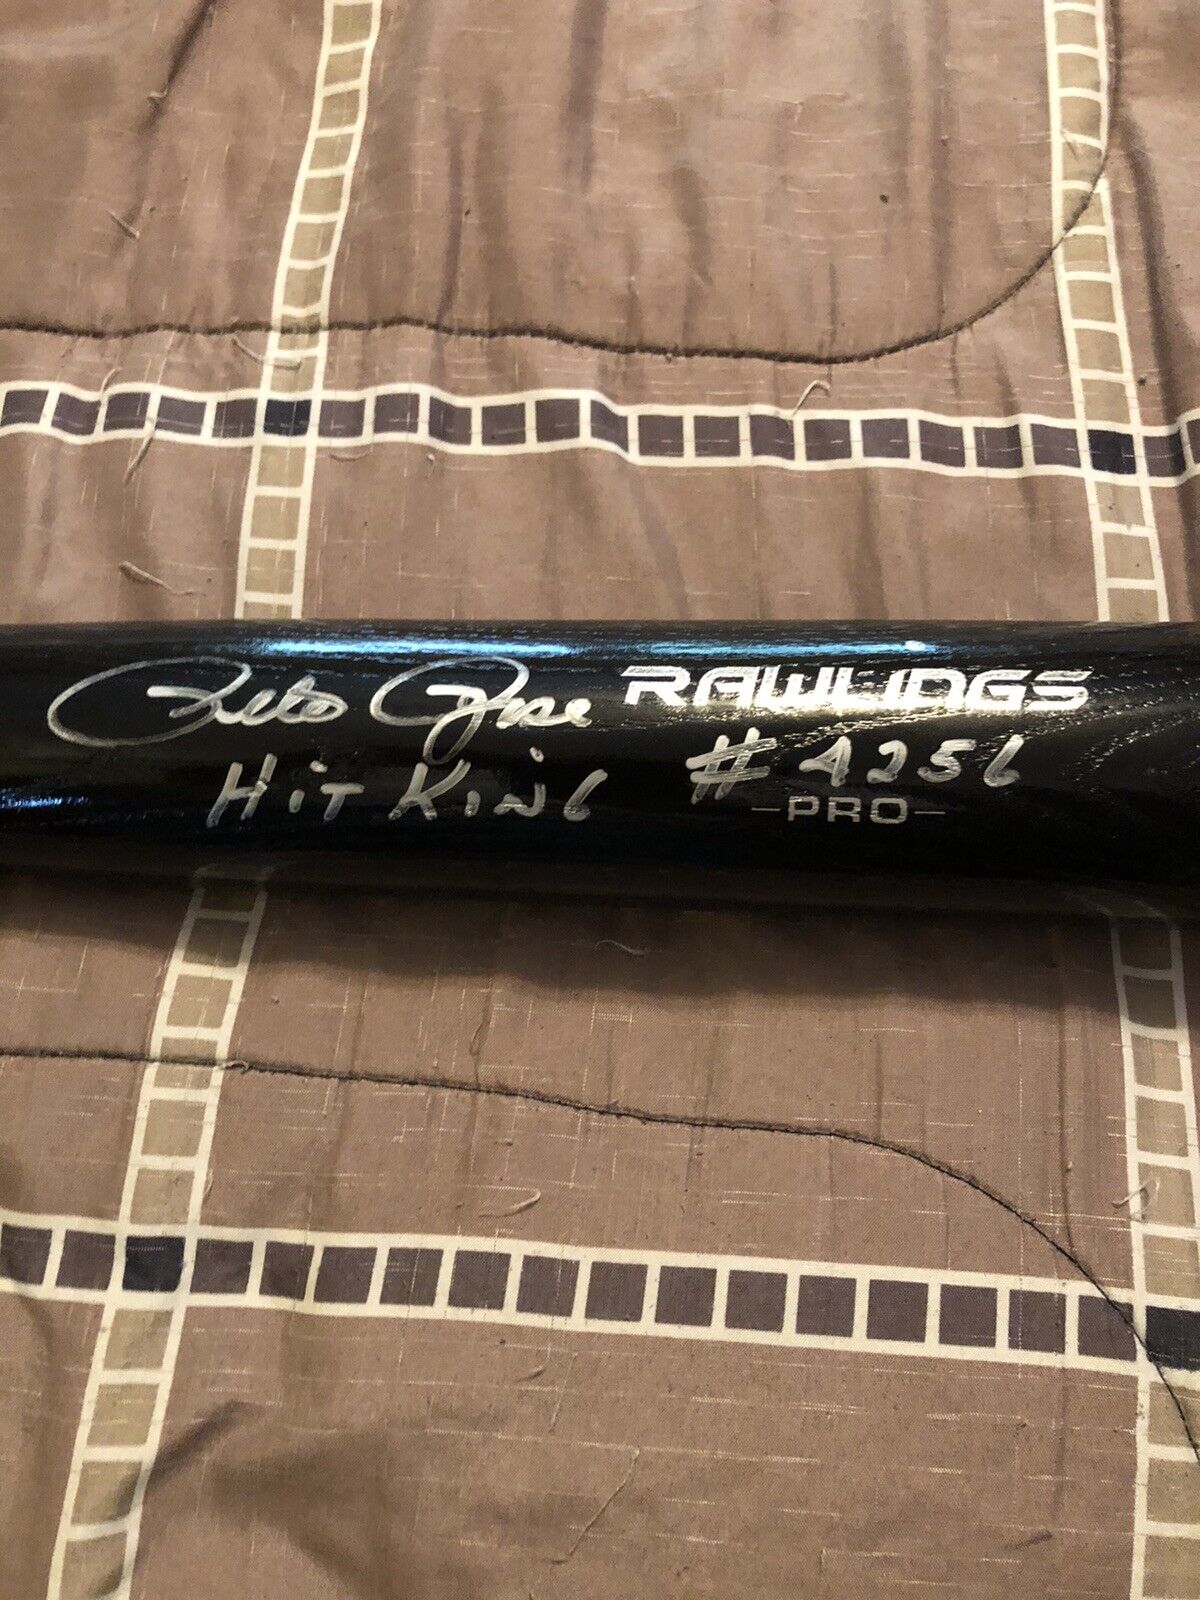 PETE ROSE AUTOGRAPHED SIGNED BLACK RAWLINGS BAT REDS \